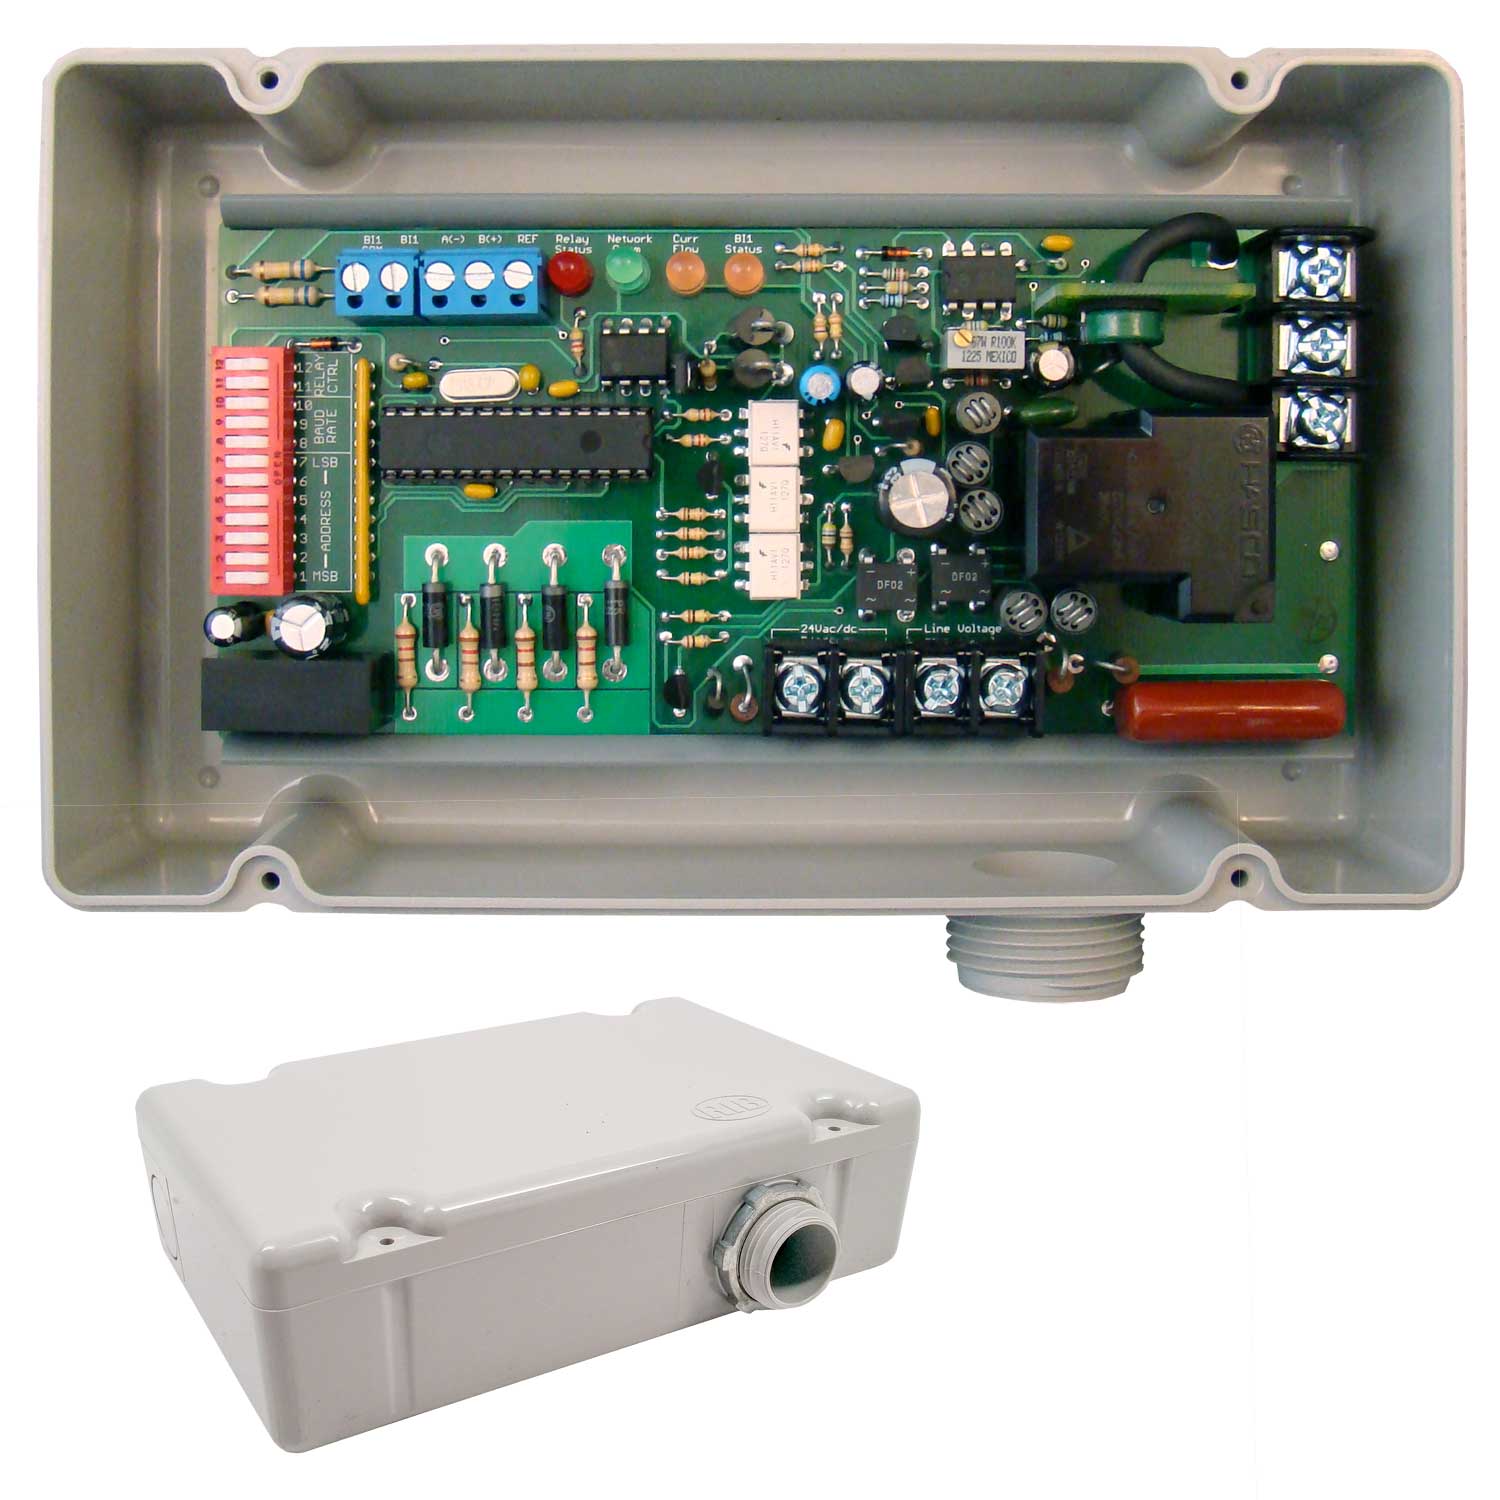 Enclosed Pre-Wired Relay, With Current Sensor, 120 VAC Input, NEMA, Grey, 20 A